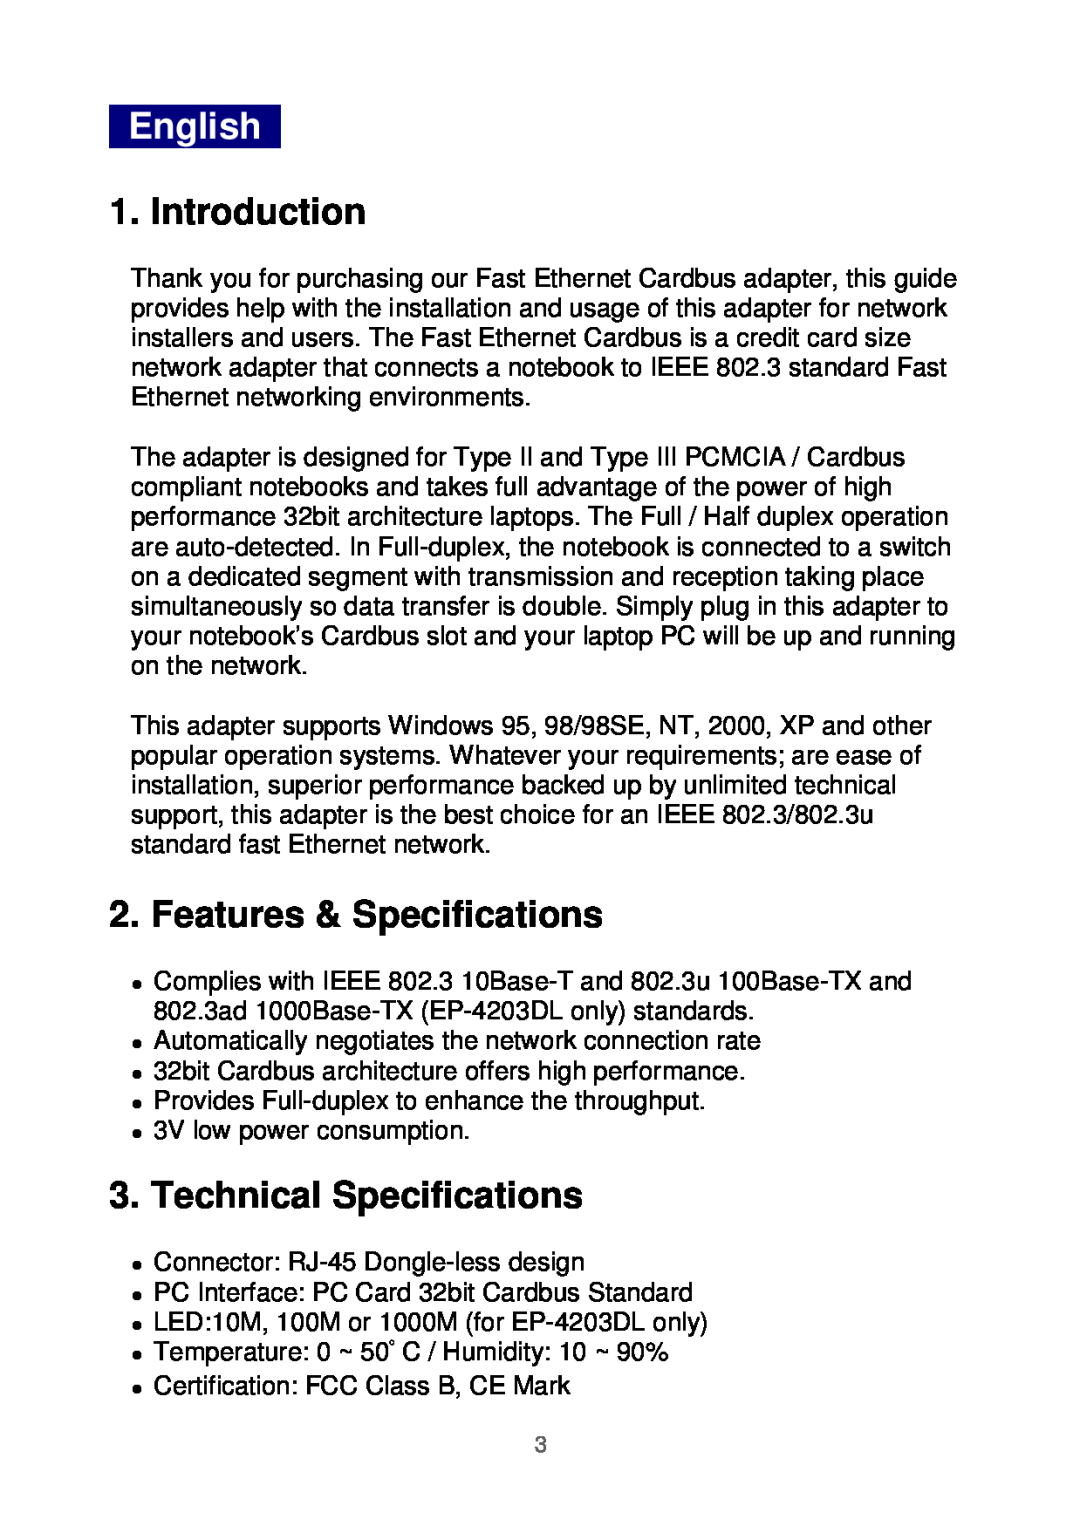 Edimax Technology Ethernet Cardbus Adapter English, Introduction, Features & Specifications, Technical Specifications 